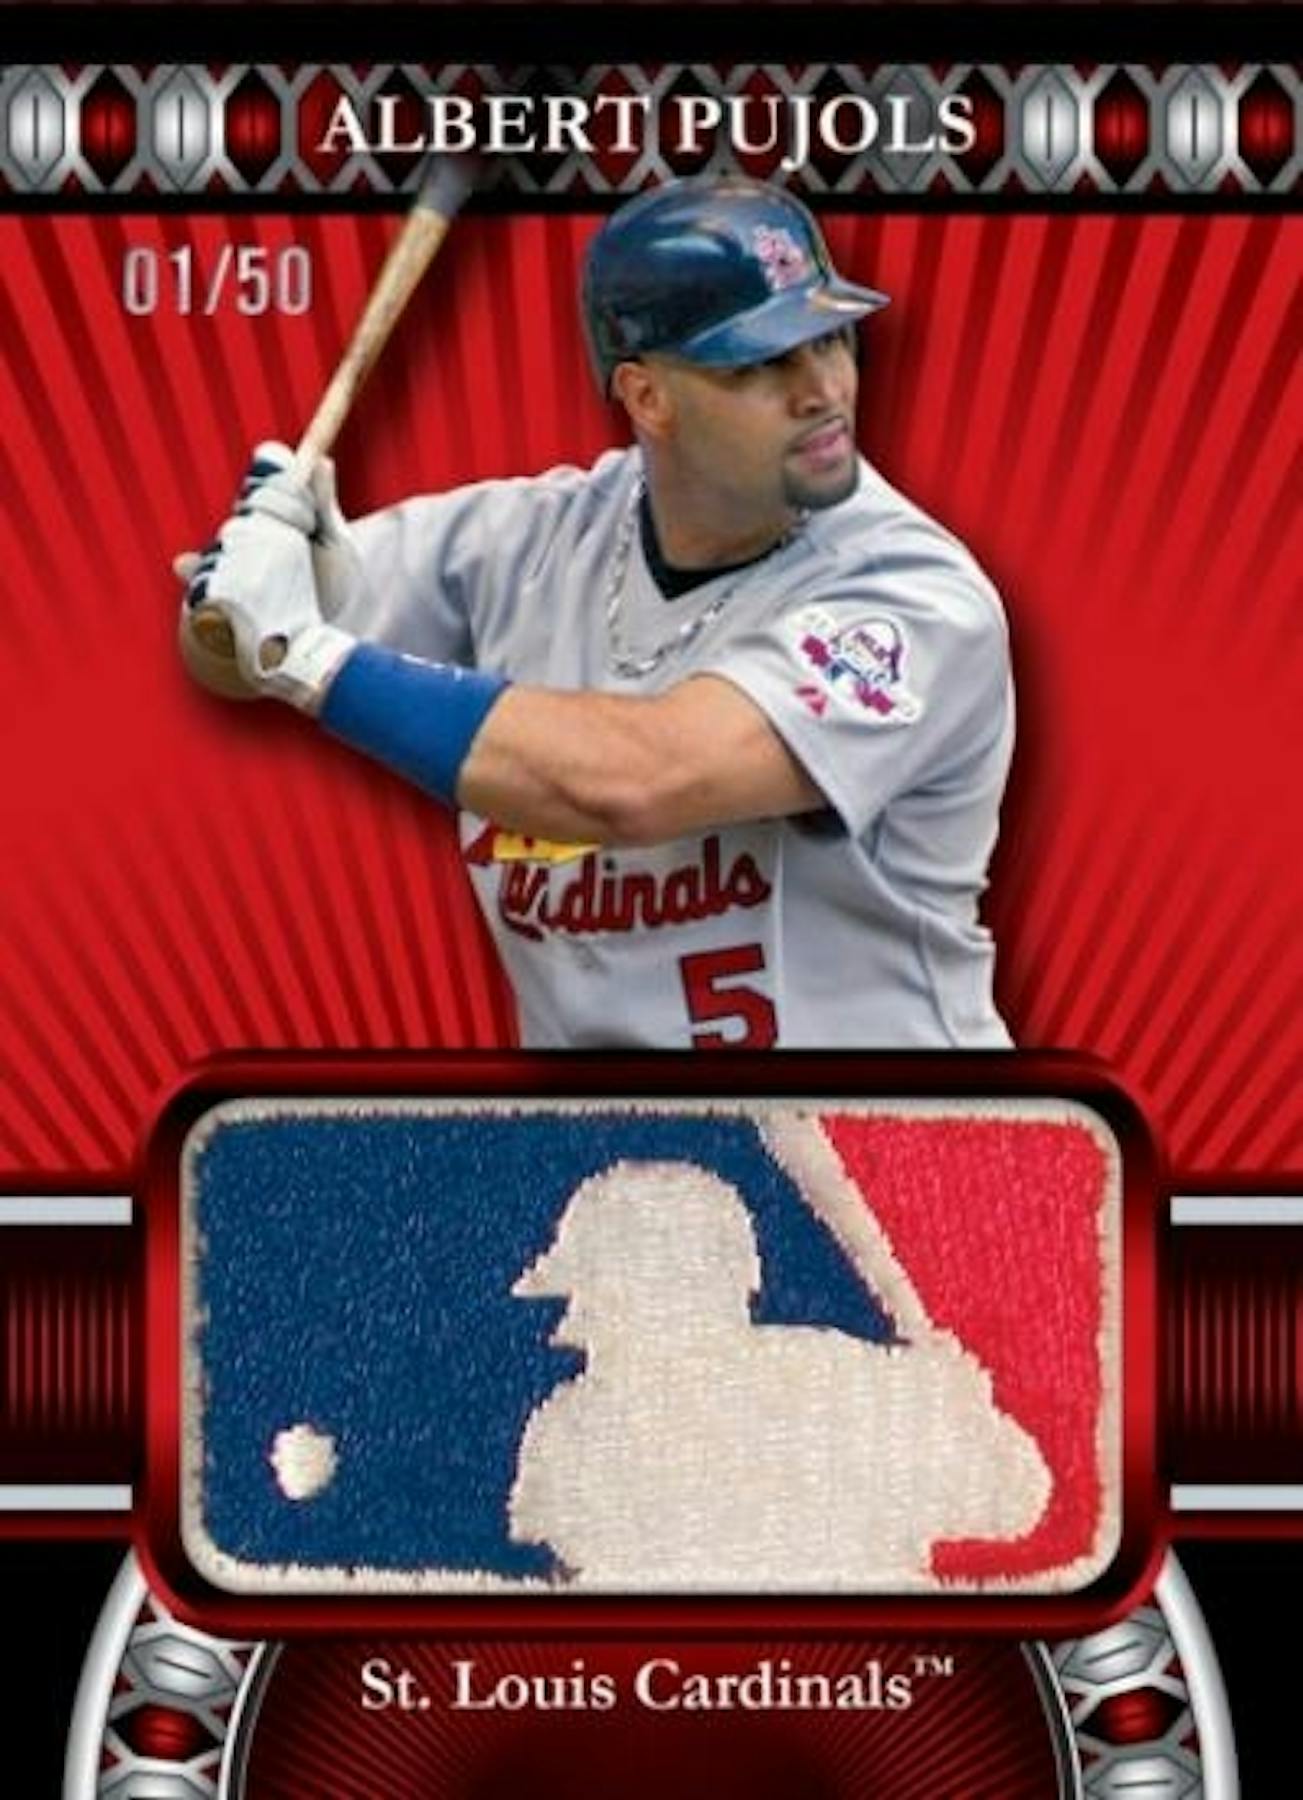  2010 Topps Traded MLB Baseball Updates and Highlights Series  330 Card Complete Mint Set Loaded with Rookies and Stars M (Mint) :  Collectibles & Fine Art